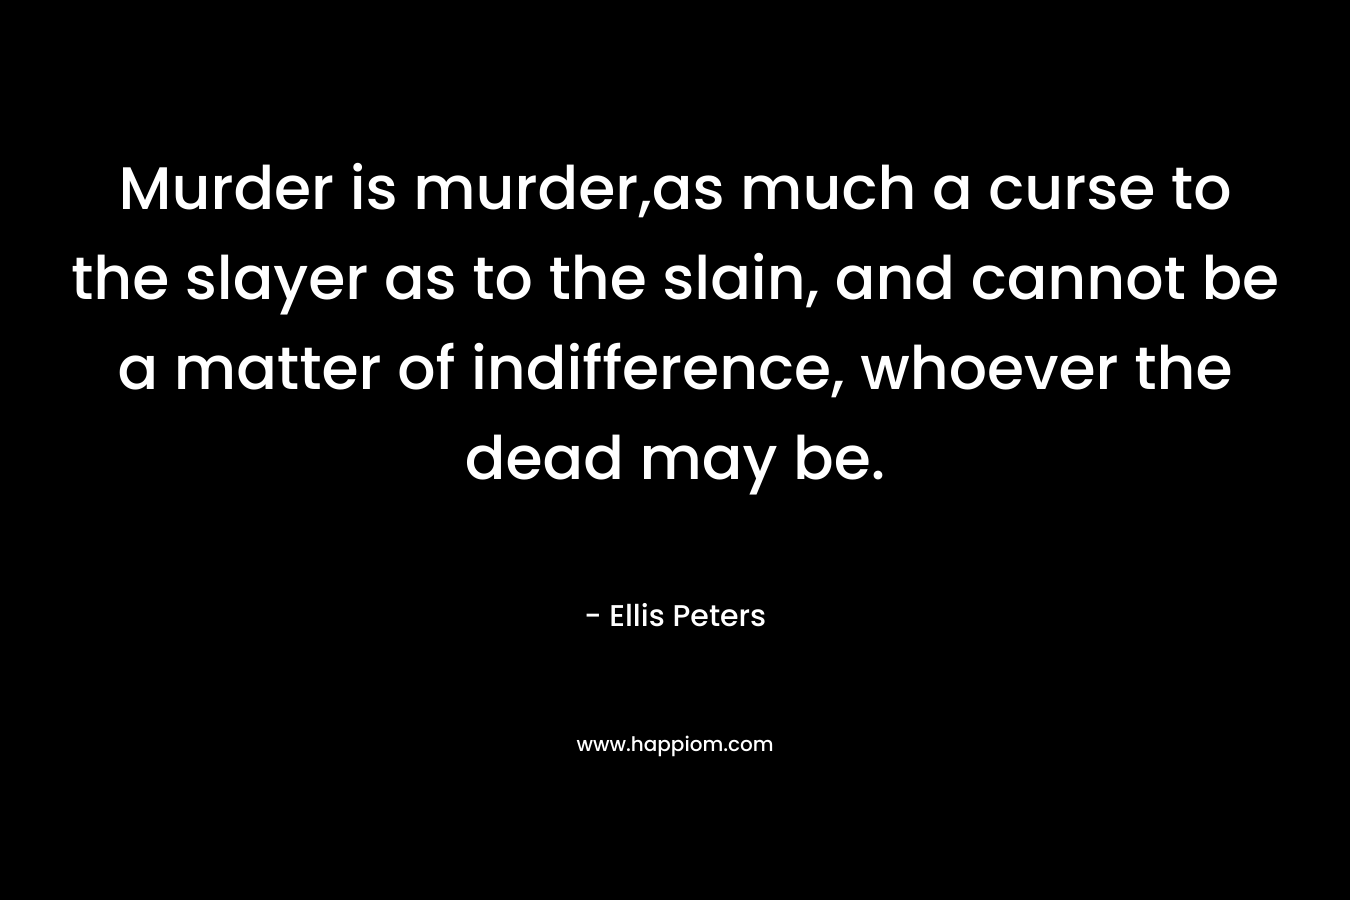 Murder is murder,as much a curse to the slayer as to the slain, and cannot be a matter of indifference, whoever the dead may be. – Ellis Peters